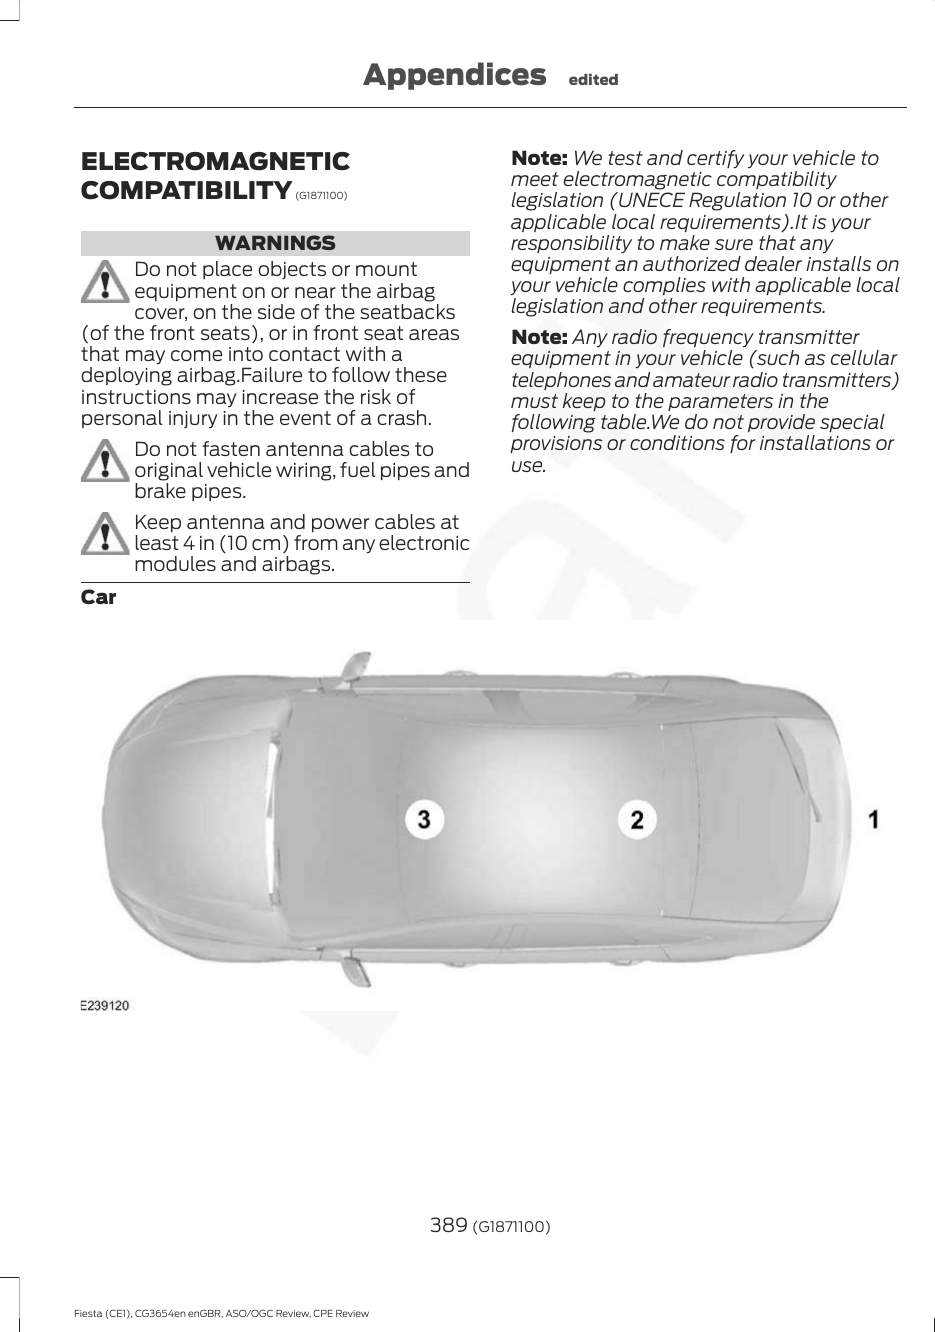 ELECTROMAGNETICCOMPATIBILITY (G1871100)WARNINGSDo not place objects or mountequipment on or near the airbagcover, on the side of the seatbacks(of the front seats), or in front seat areasthat may come into contact with adeploying airbag.Failure to follow theseinstructions may increase the risk ofpersonal injury in the event of a crash.Do not fasten antenna cables tooriginal vehicle wiring, fuel pipes andbrake pipes.Keep antenna and power cables atleast 4 in (10 cm) from any electronicmodules and airbags.Note: We test and certify your vehicle tomeet electromagnetic compatibilitylegislation (UNECE Regulation 10 or otherapplicable local requirements).It is yourresponsibility to make sure that anyequipment an authorized dealer installs onyour vehicle complies with applicable locallegislation and other requirements.Note: Any radio frequency transmitterequipment in your vehicle (such as cellulartelephones and amateur radio transmitters)must keep to the parameters in thefollowing table.We do not provide specialprovisions or conditions for installations oruse.Car389 (G1871100)Fiesta (CE1), CG3654en enGBR, ASO/OGC Review, CPE ReviewAppendices edited